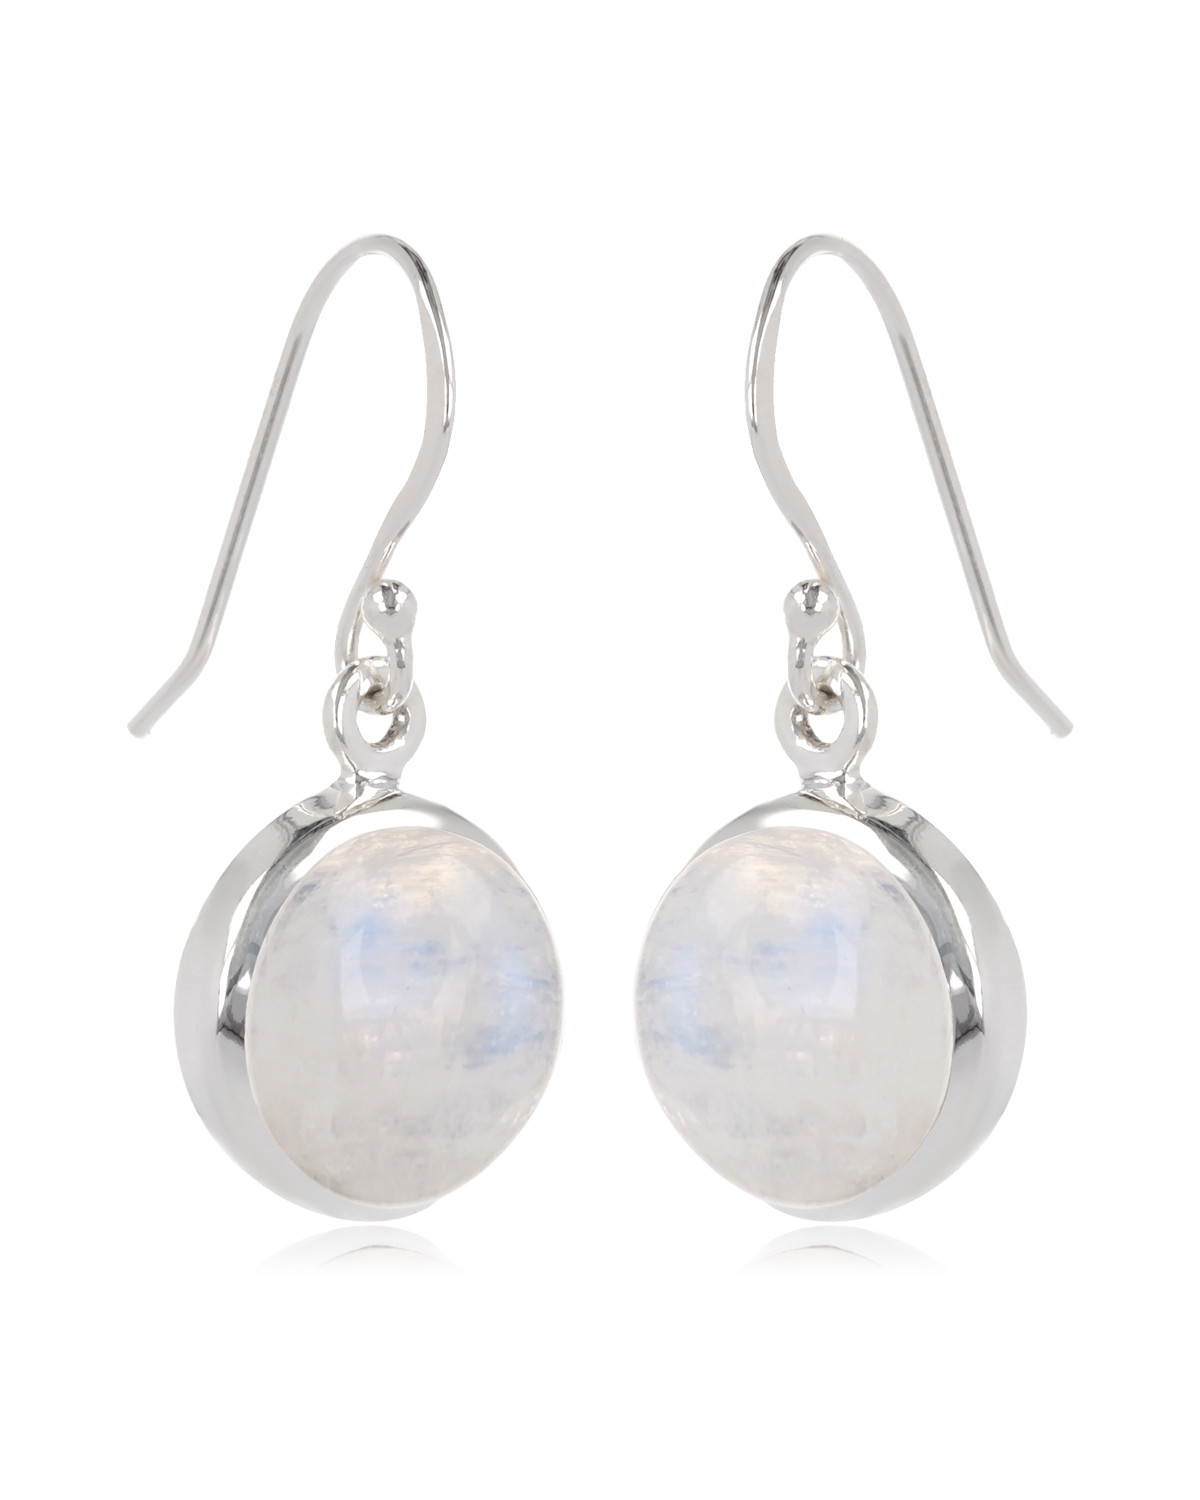 Ovalshaped moonstone earrings set with sterling silver